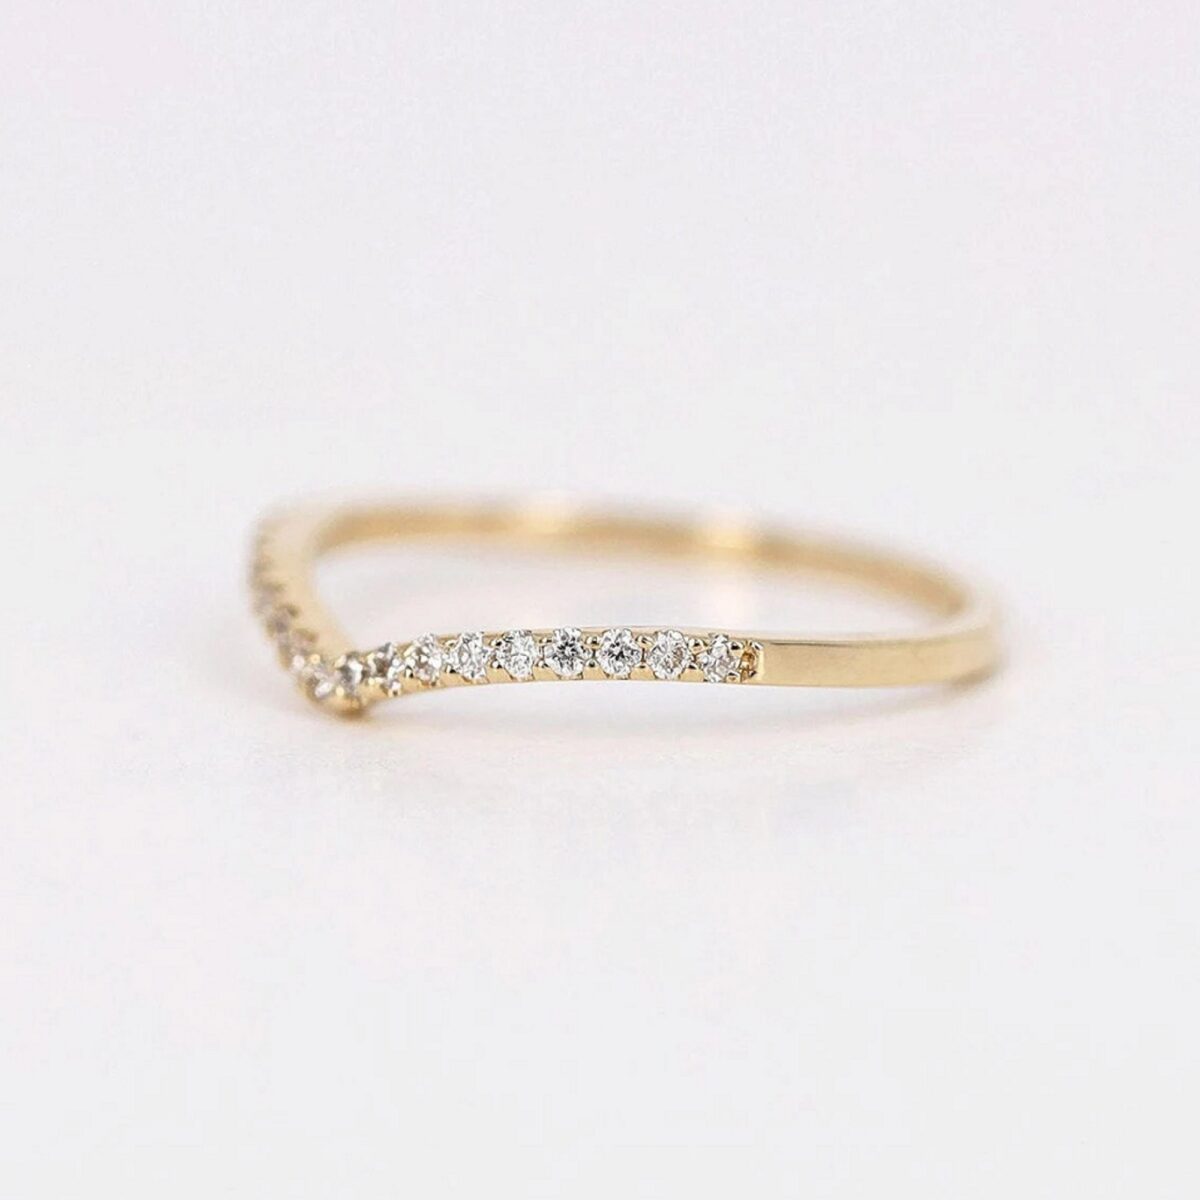 Minimalist style round cut lab grown diamond wedding band crafted in 18K yellow gold